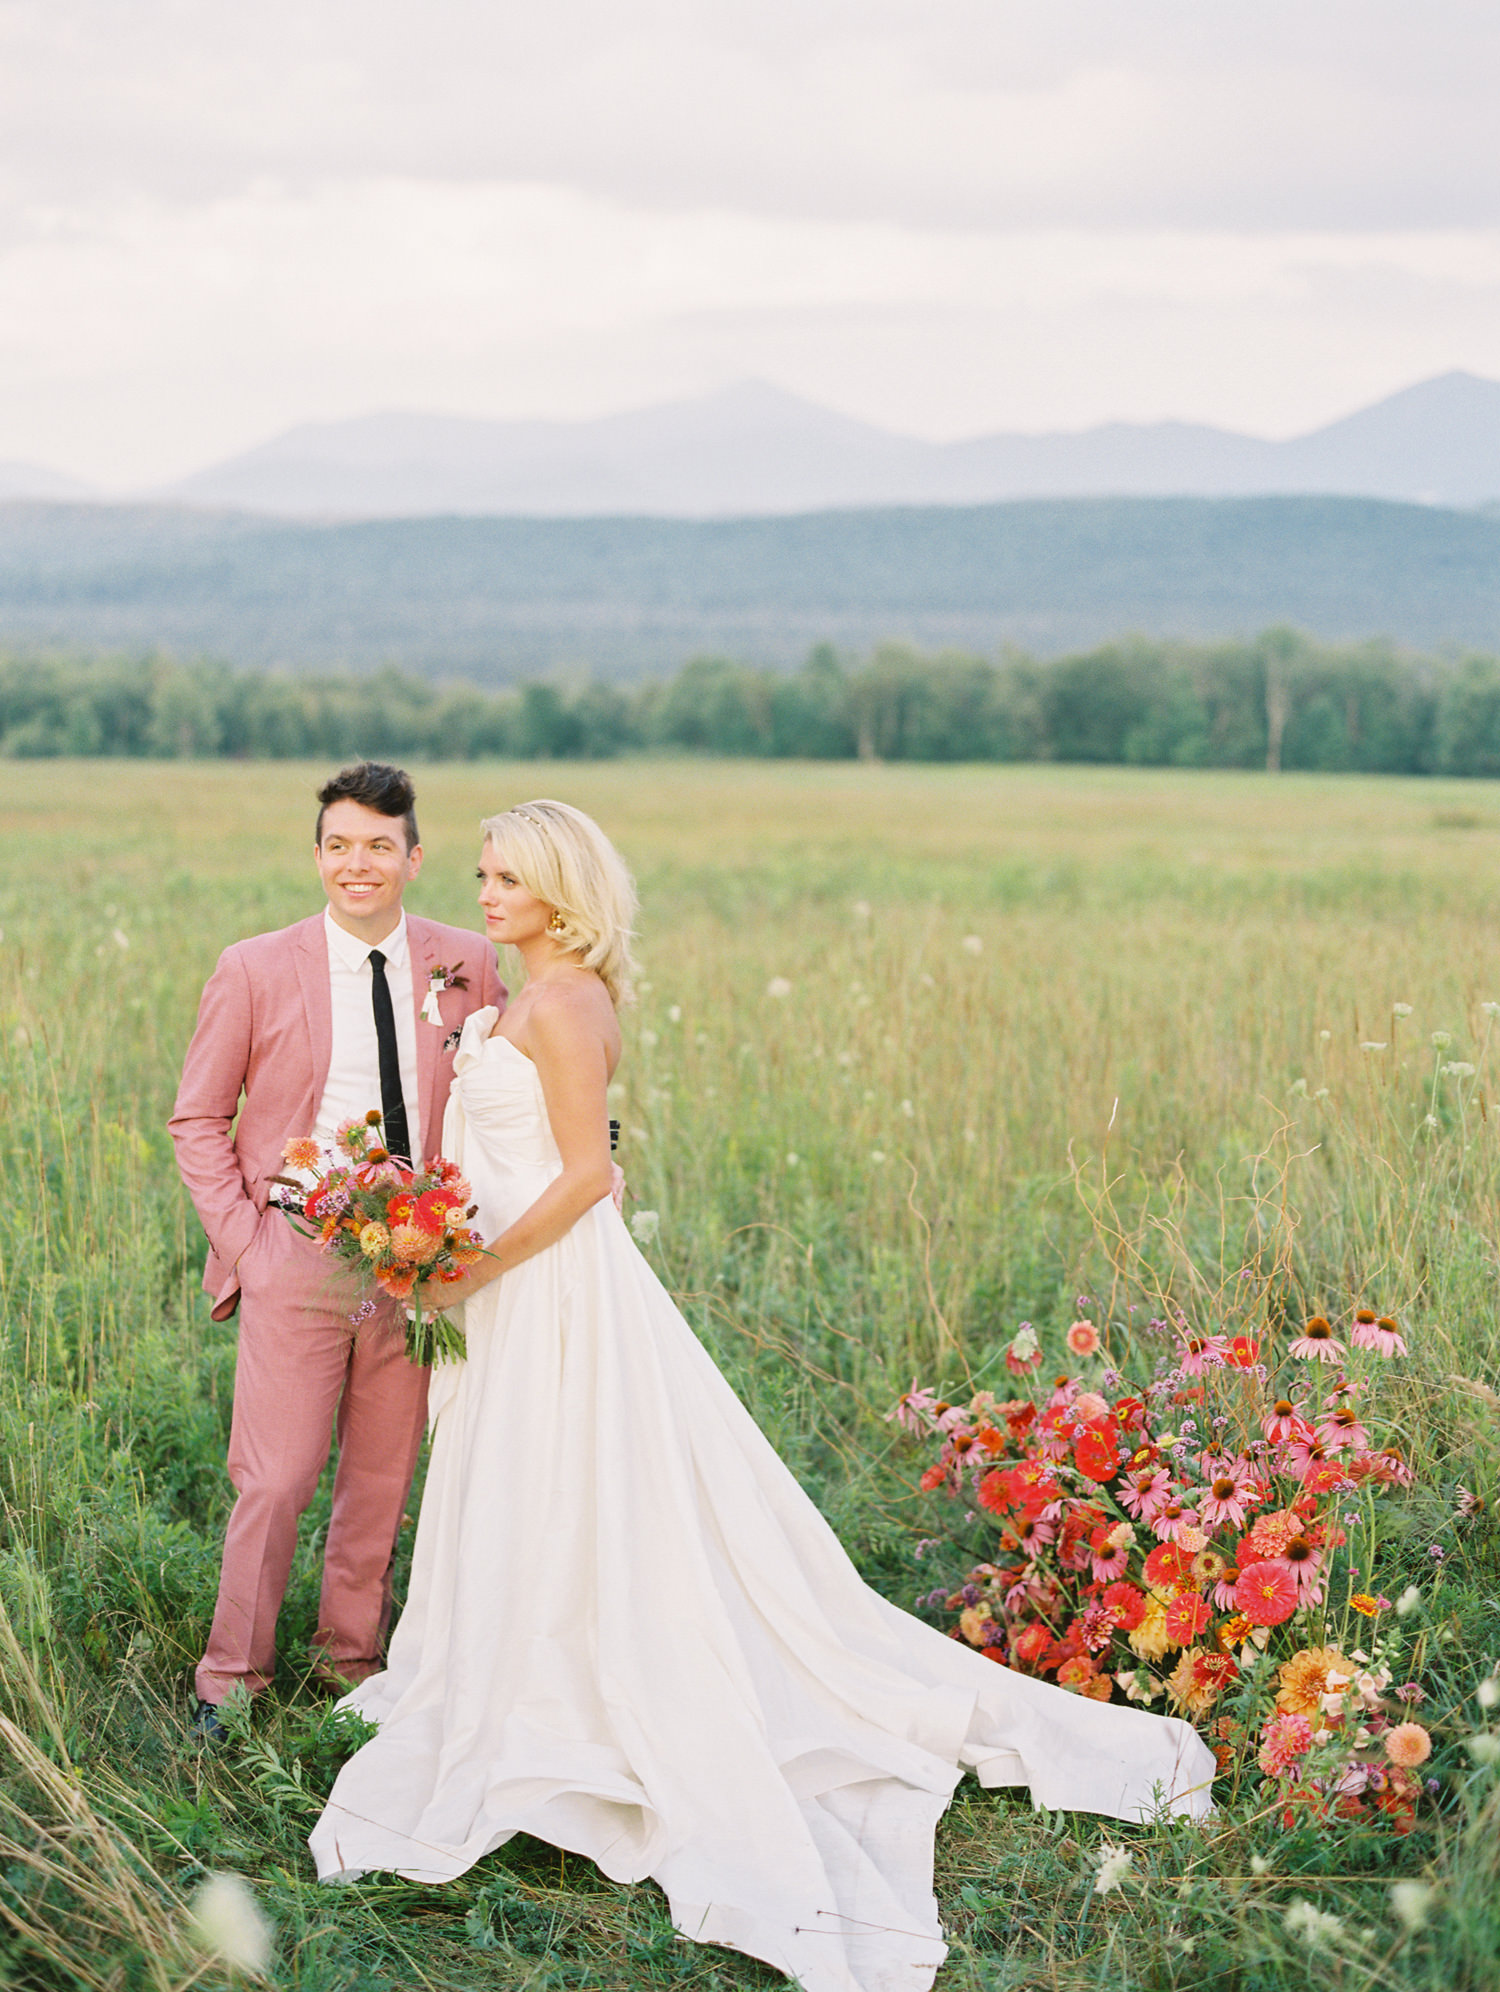 Mountain View Intimate Wedding | 2020  Adirondack Wedding Workshop hosted by Mary Dougherty